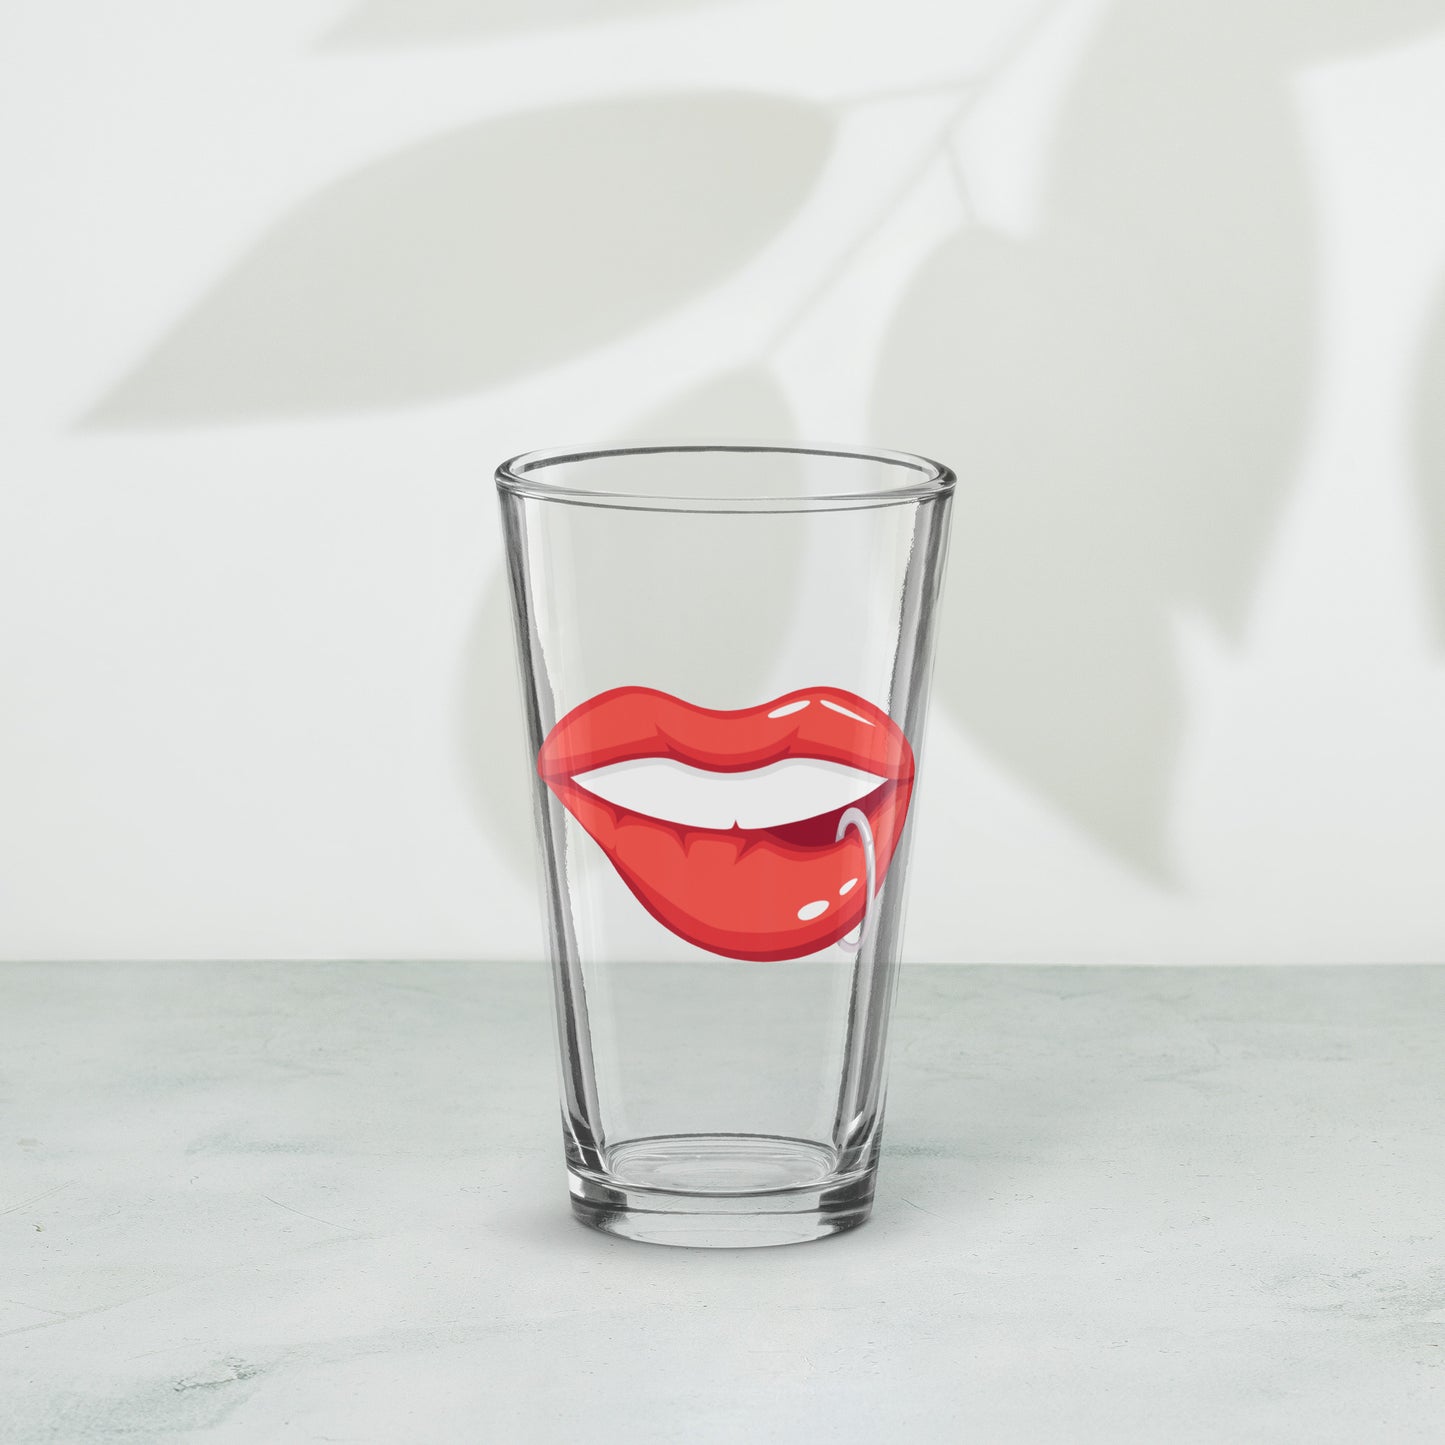 Shaker Pint Glass: Vivid Red Mouth with Lip Piercing